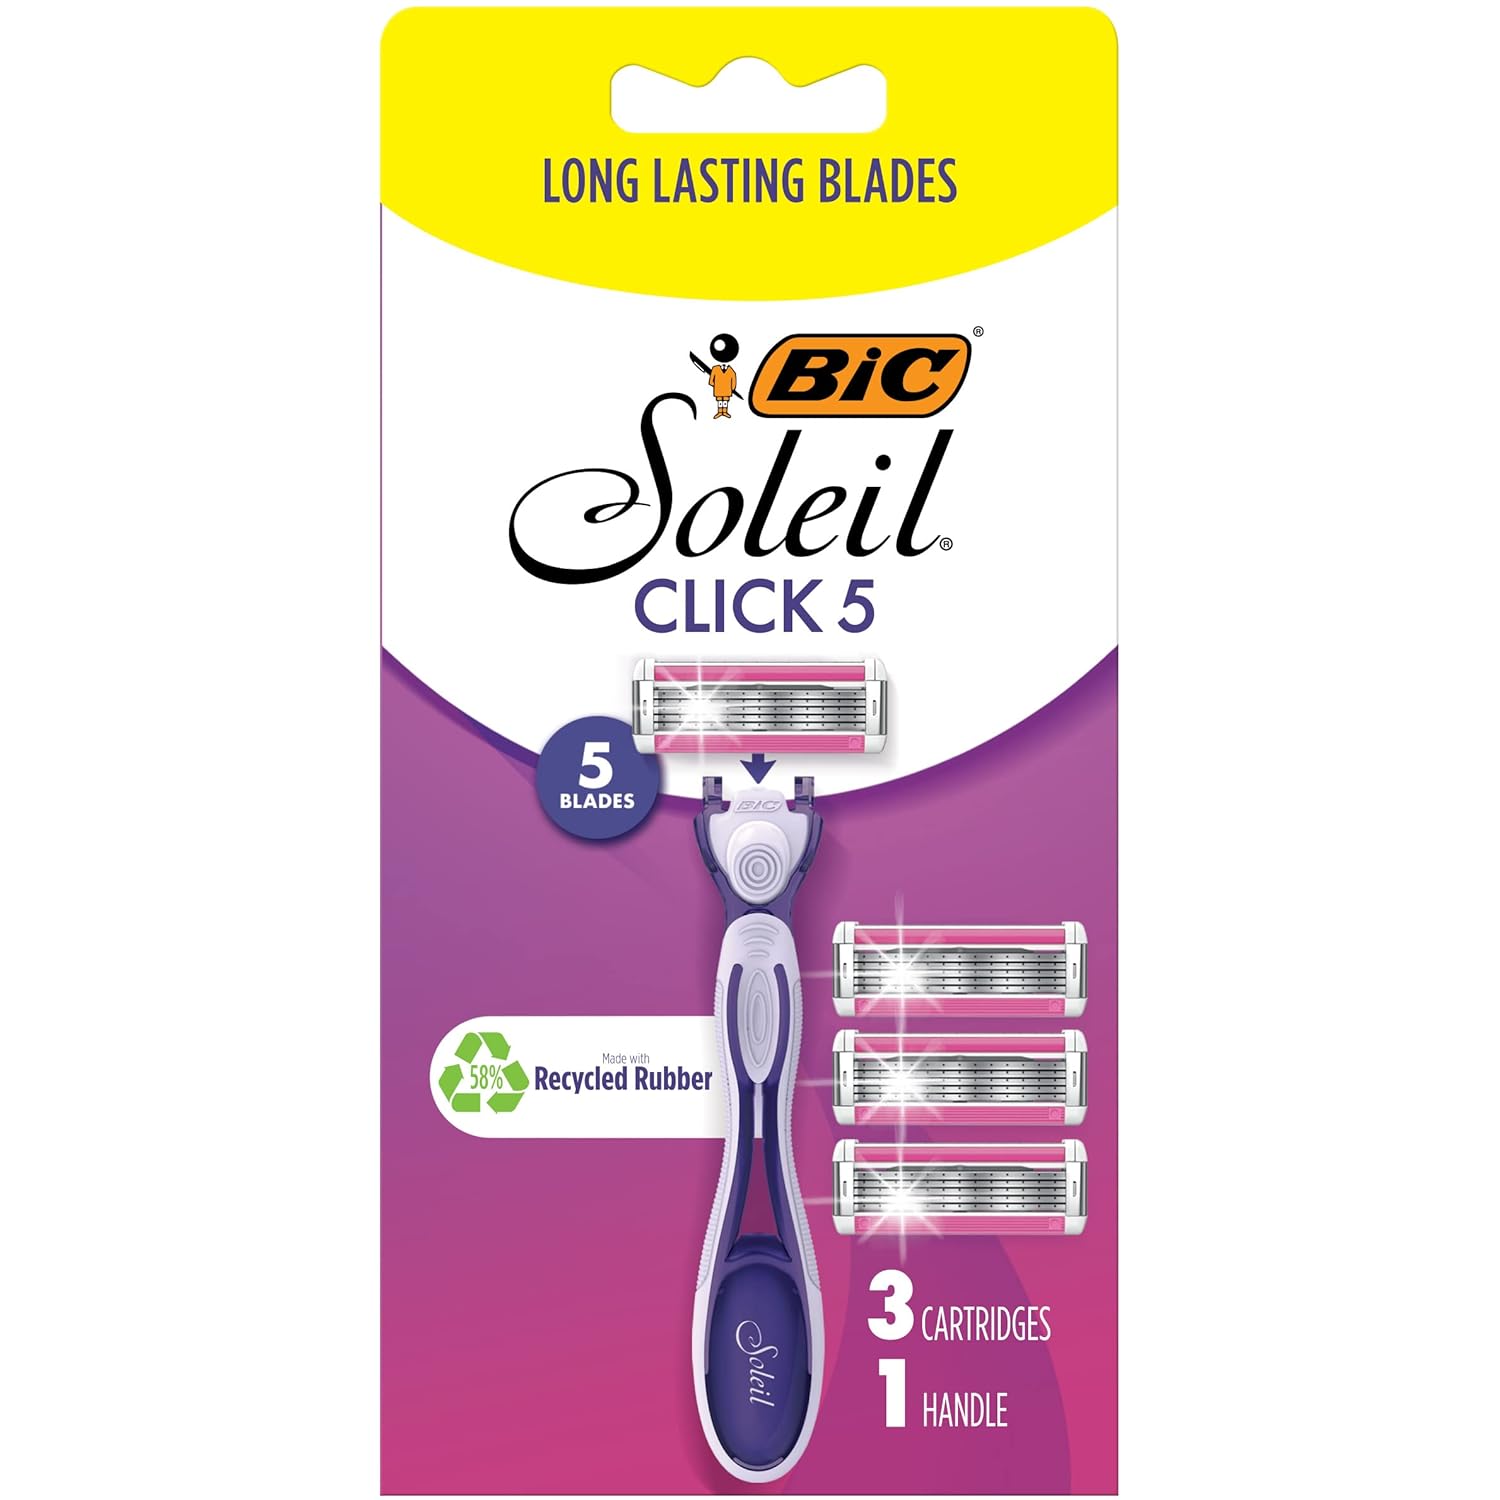 BIC Click 5 Soleil Women' Disposable Razors, 5 Blades With a Moisture Strip For a Smoother Shave, 1 Handle and 3 Cartridges, 4 Piece Razor Set